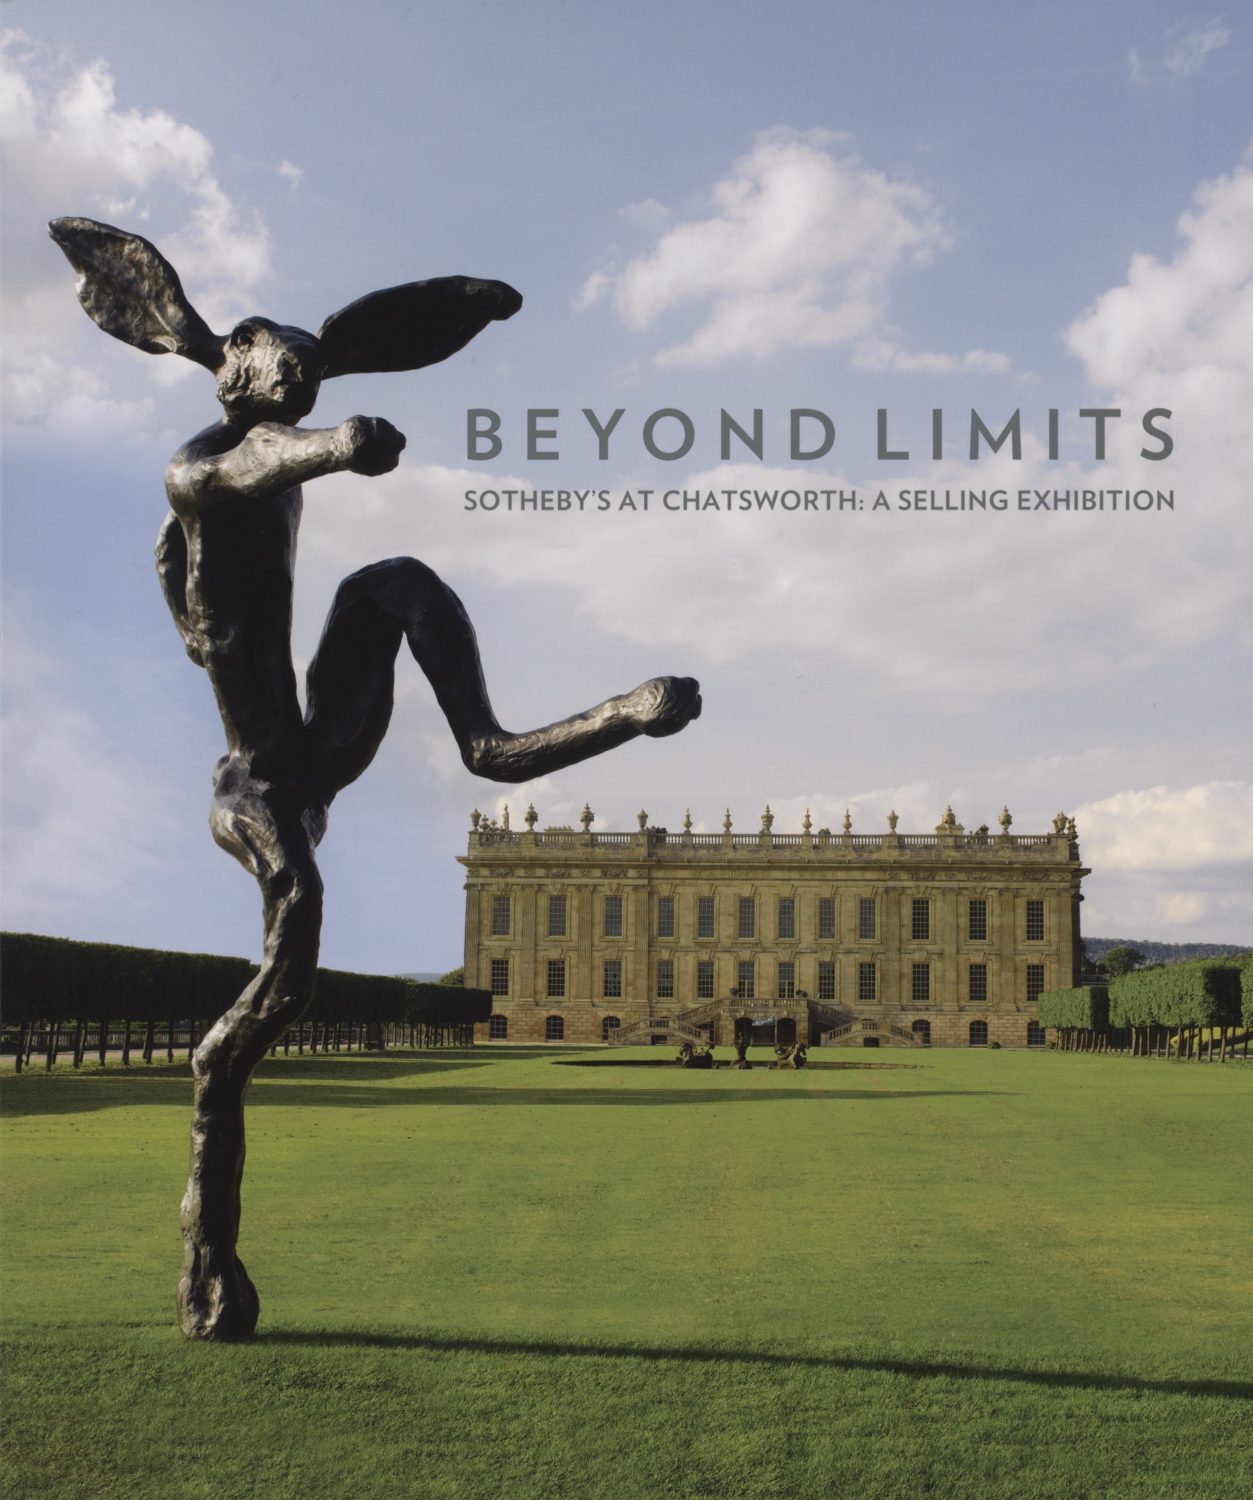 Beyond Limits Sotheby’s at Chatsworth: A Selling Exhibition